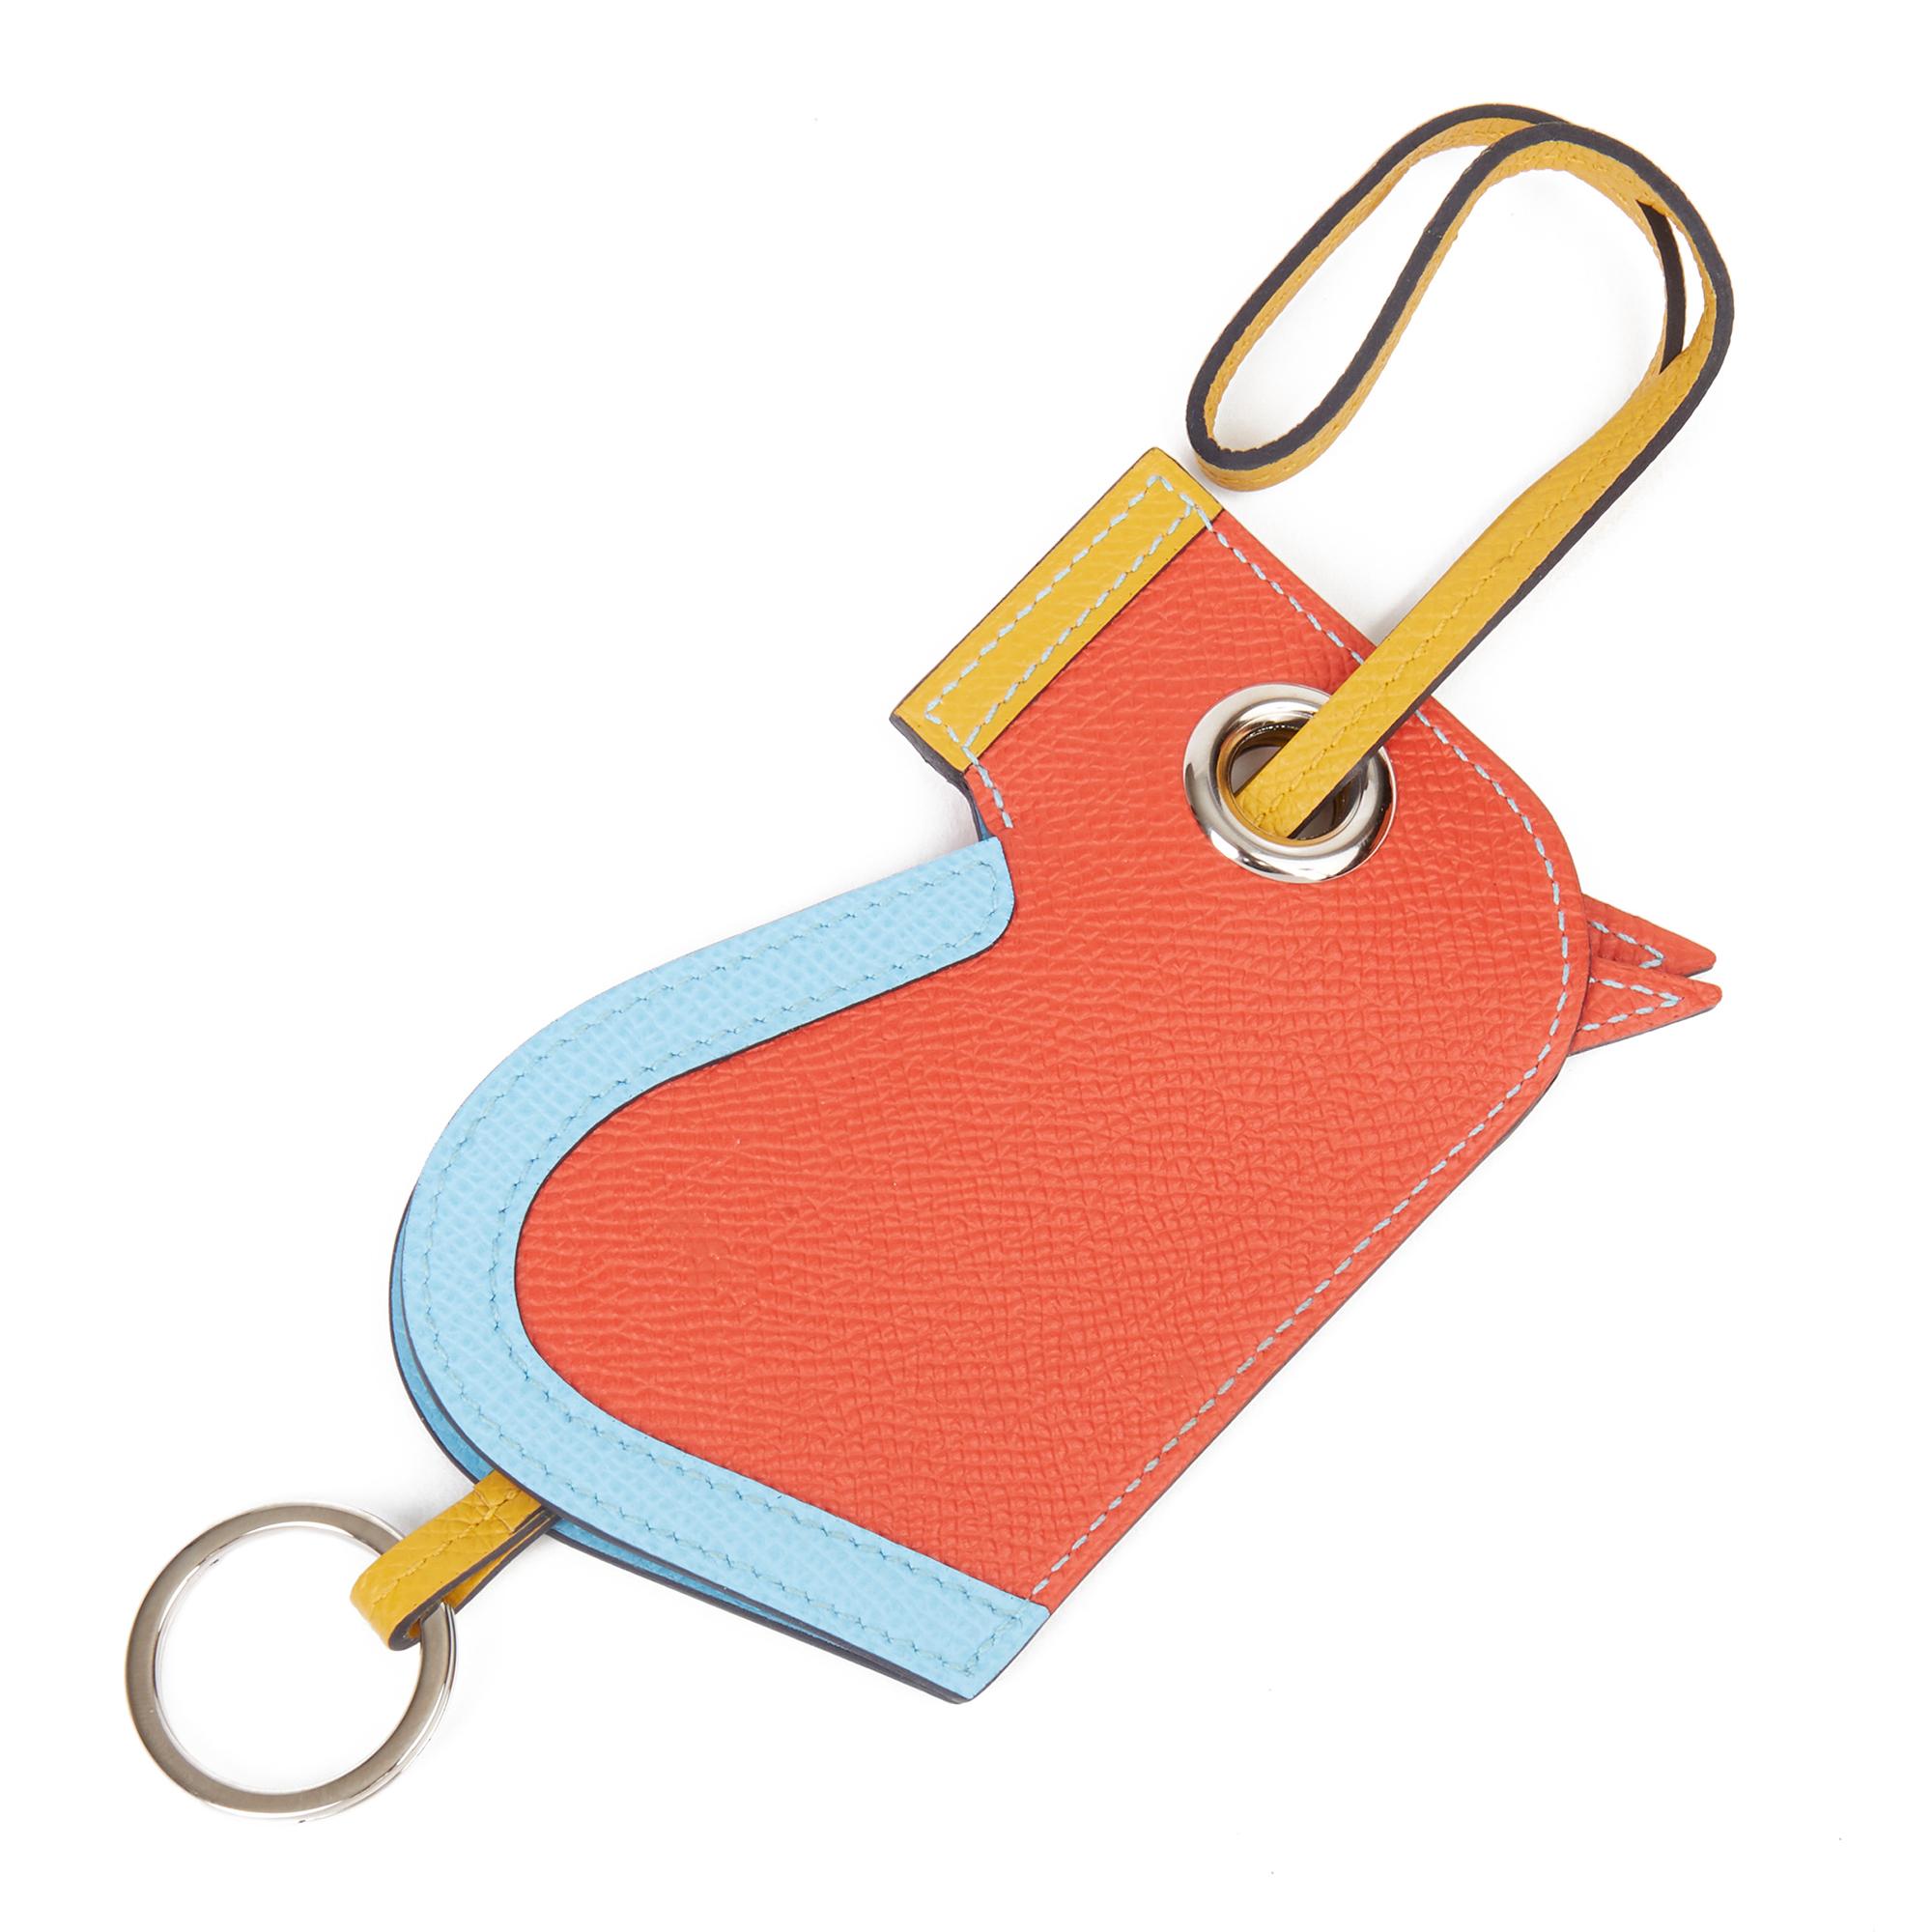 HERMÈS
Celeste, Capucine & Ambre Epsom Leather Camail Key Holder Charm 

Serial Number: A
Age (Circa): 2017 
Accompanied By: Hermès Box
Authenticity Details: Date Stamp (Made in France) 
Gender: Unisex
Type: Accessory

Colour: Celeste, Capucine,